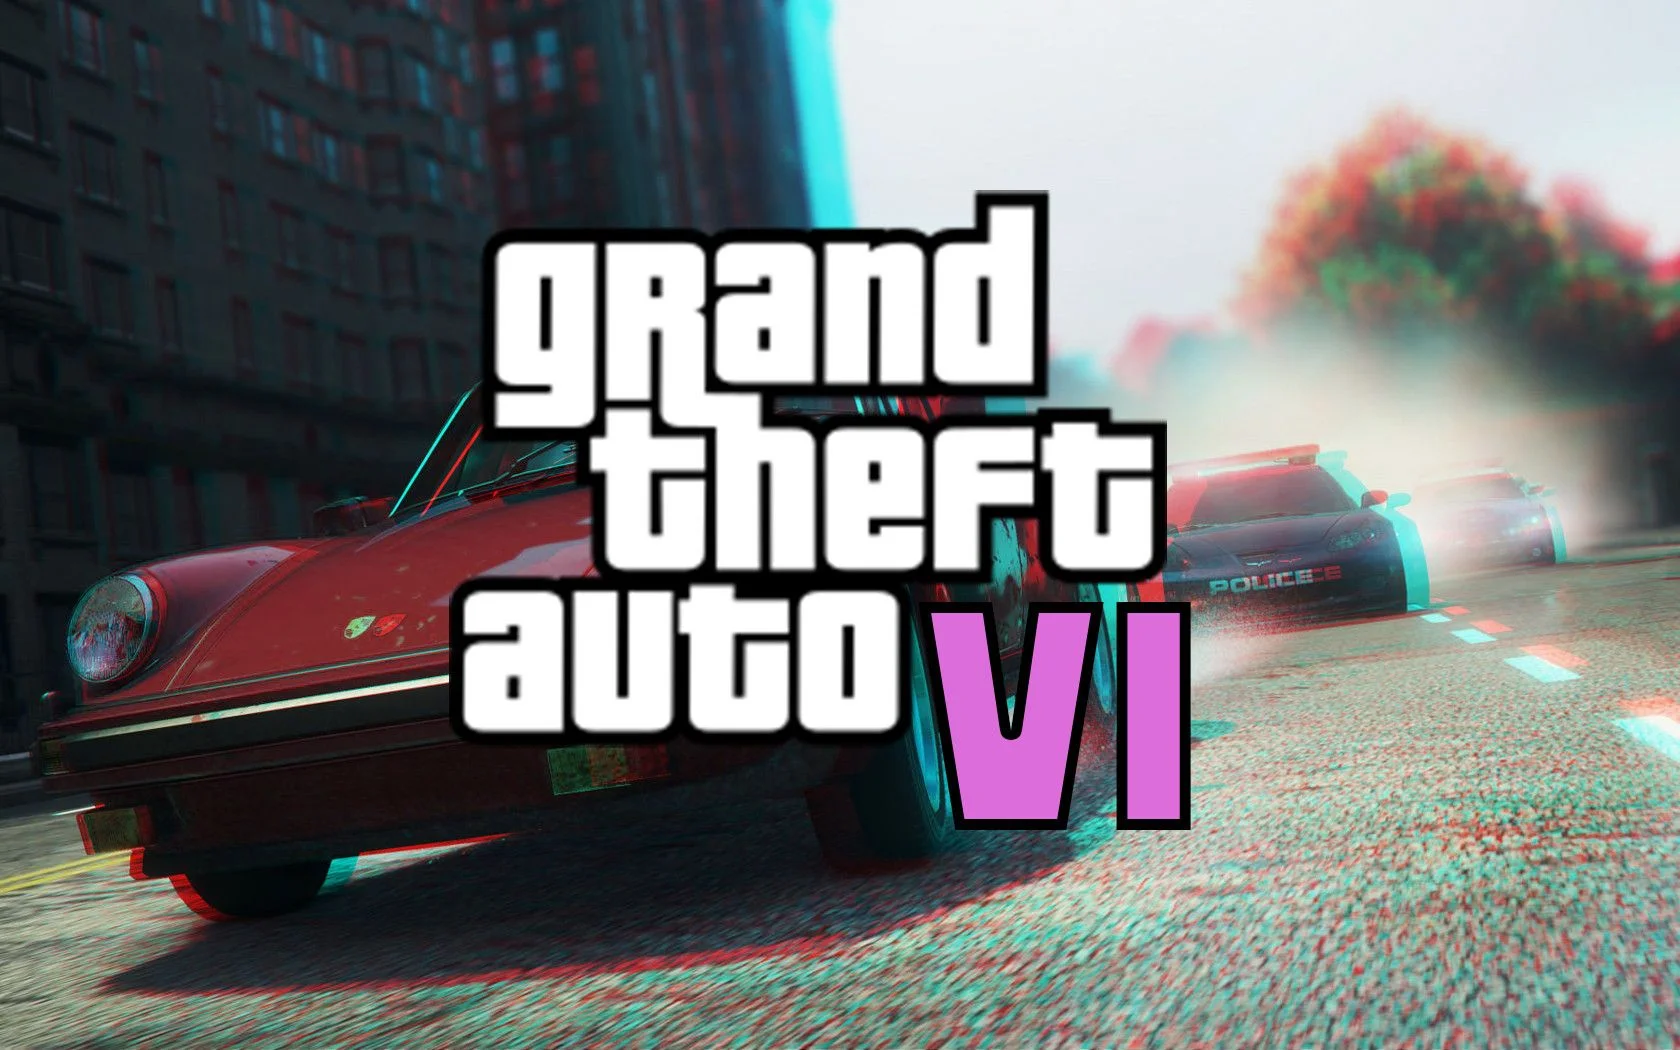 A new frame from GTA 6 has been leaked online